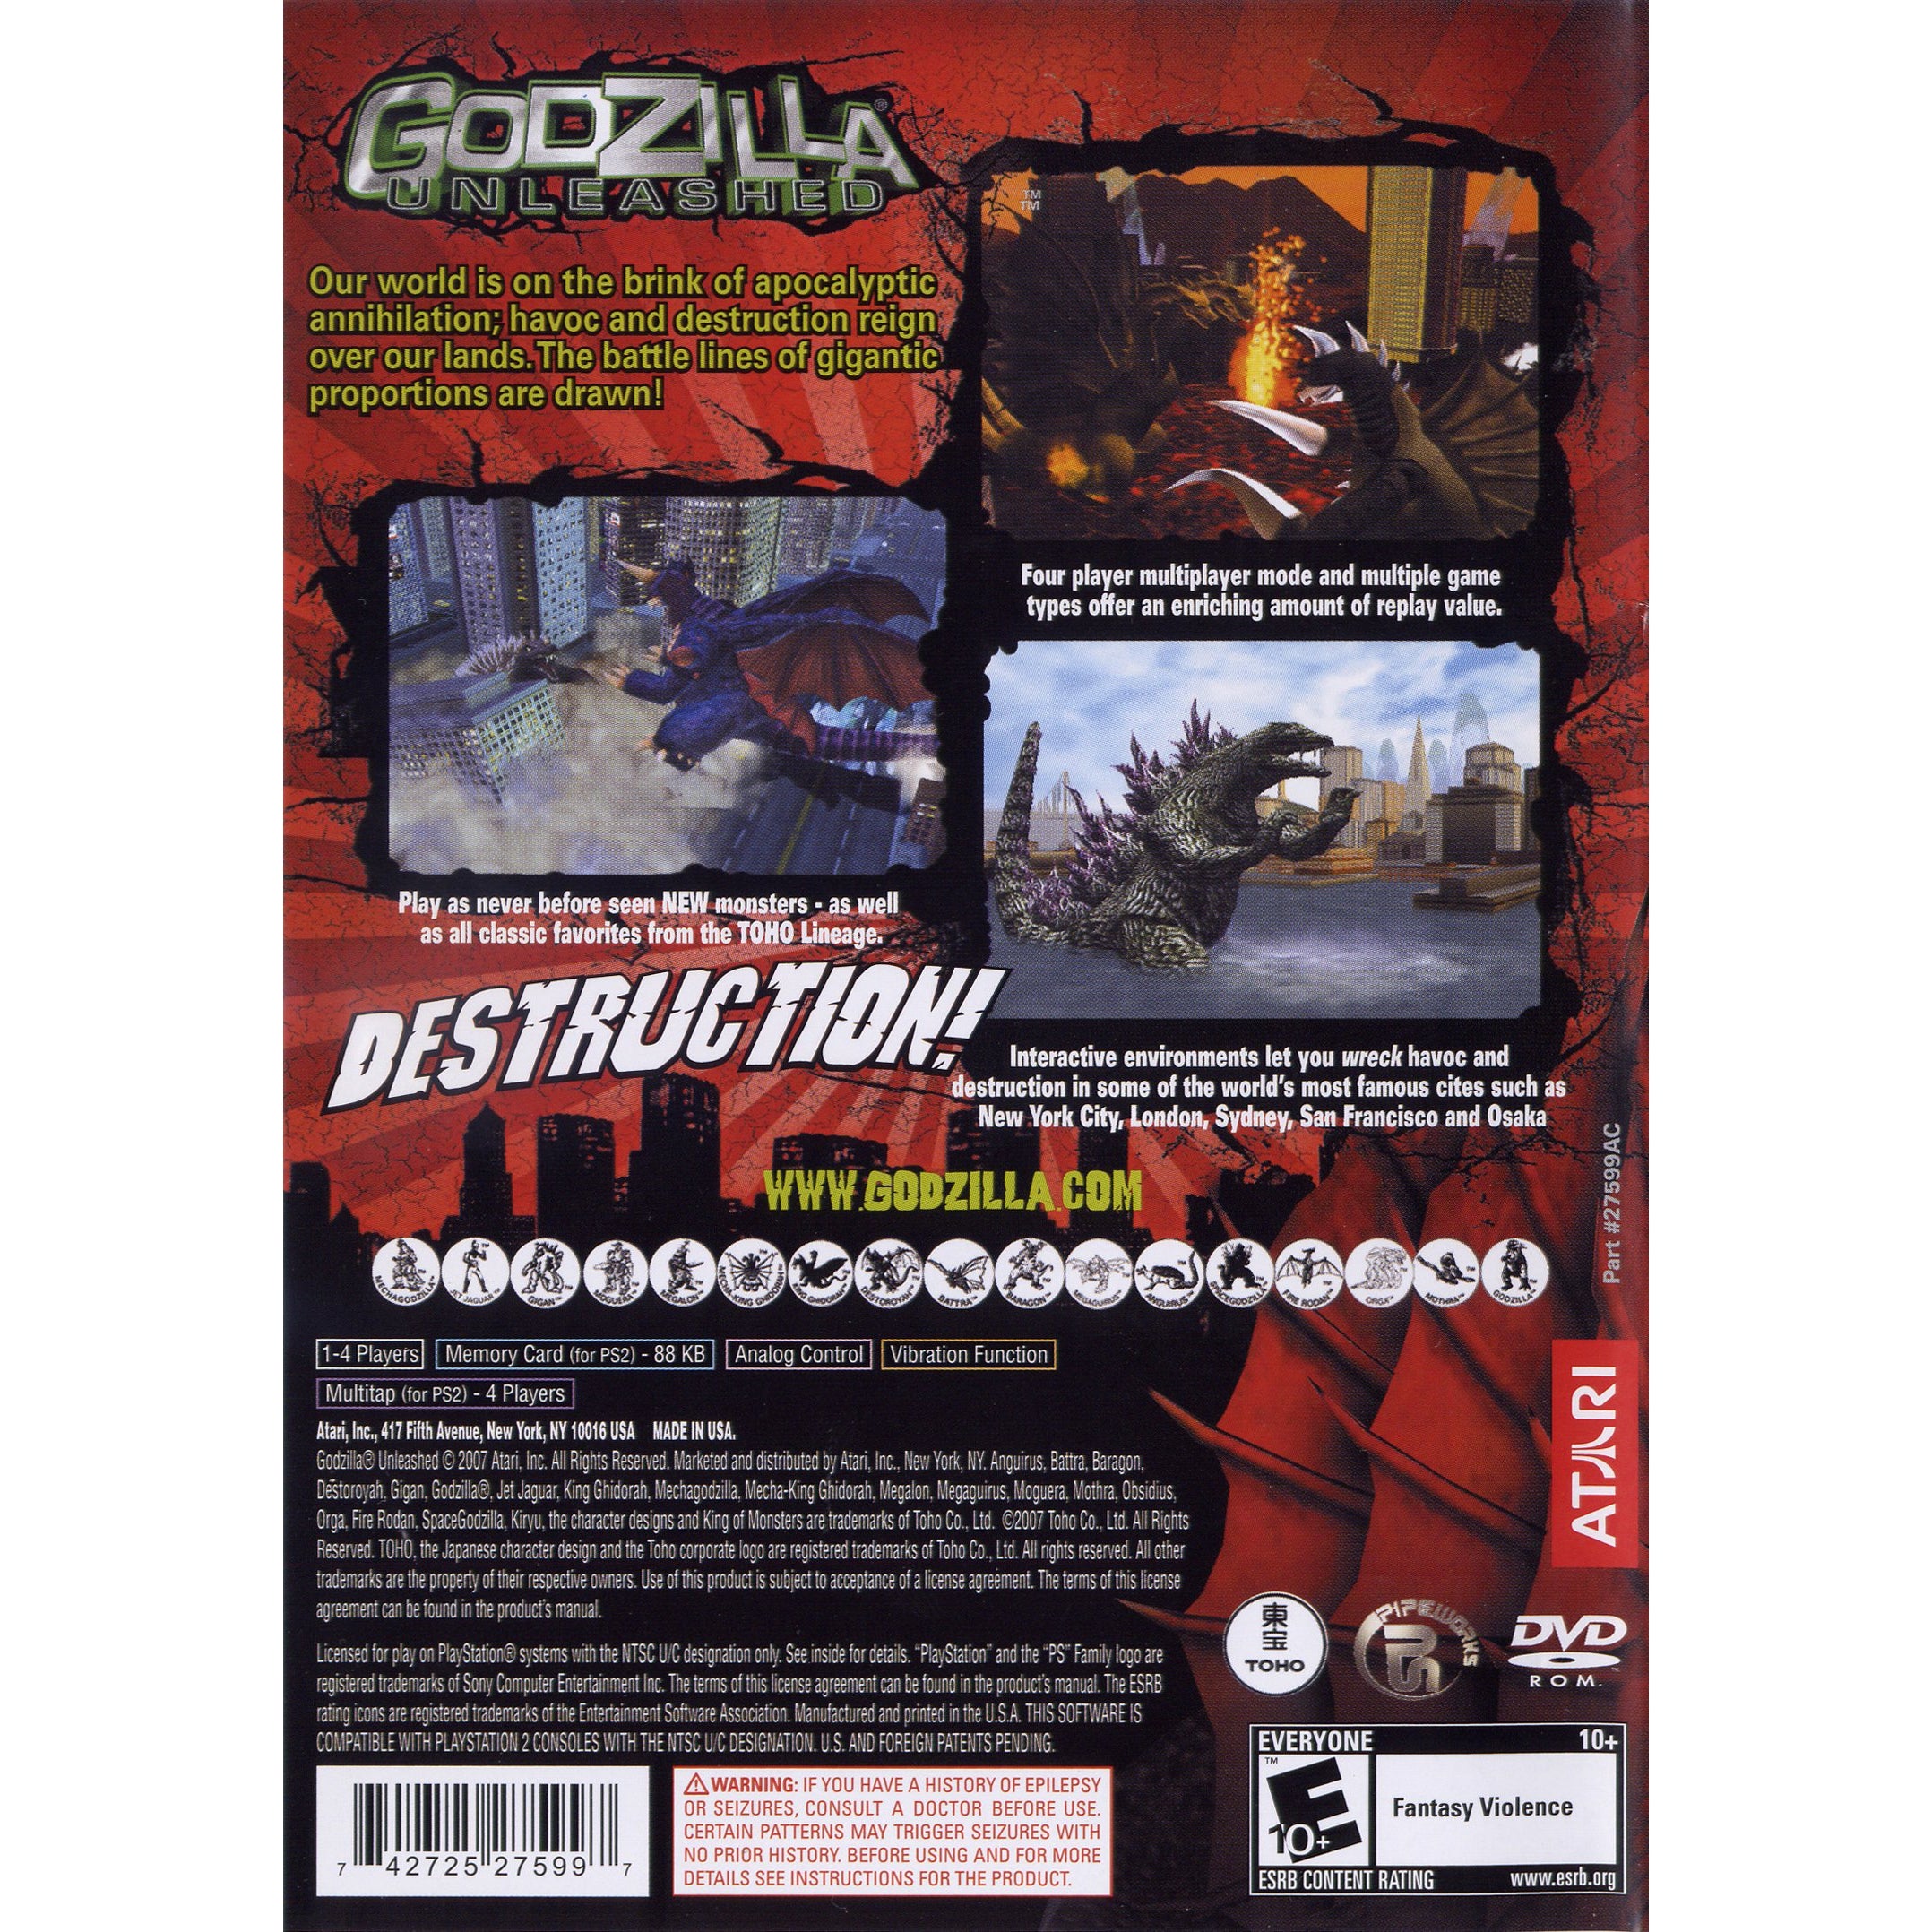 Godzilla Unleashed Playstation 2 Ps2 Game For Sale Your Gaming Your Gaming Shop 7190